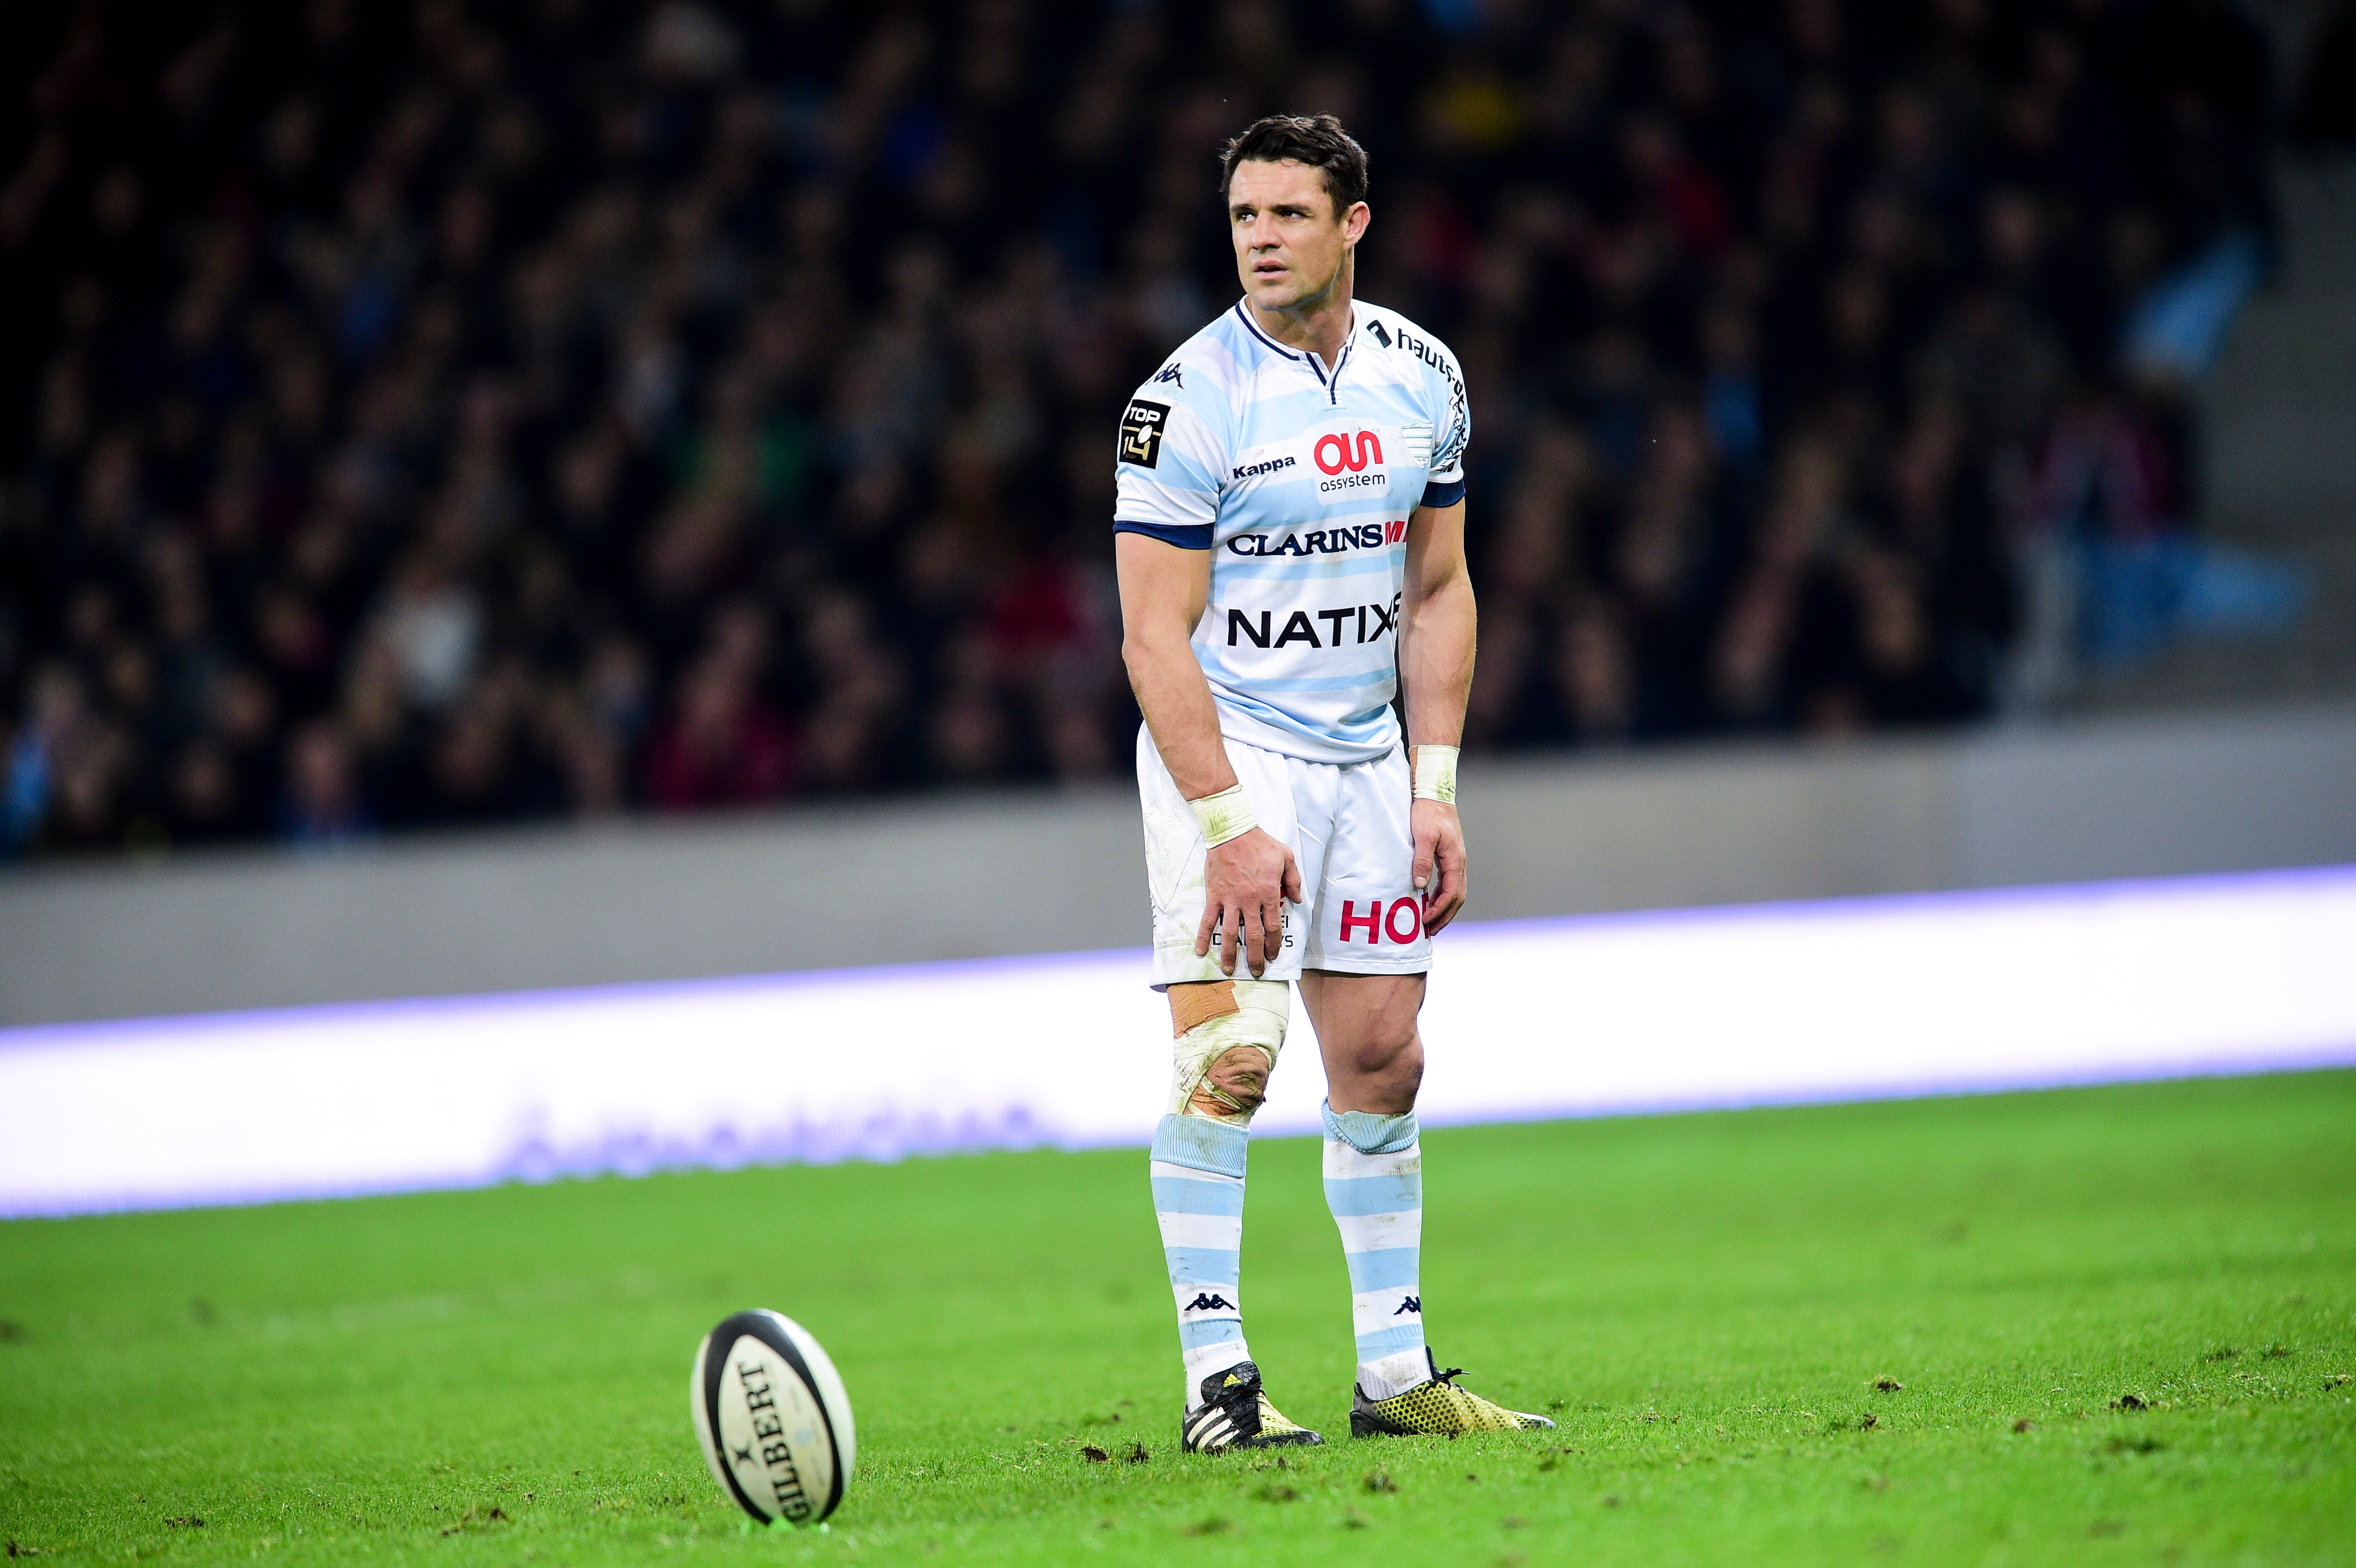 Dan Carter to be inducted into Hall of Fame